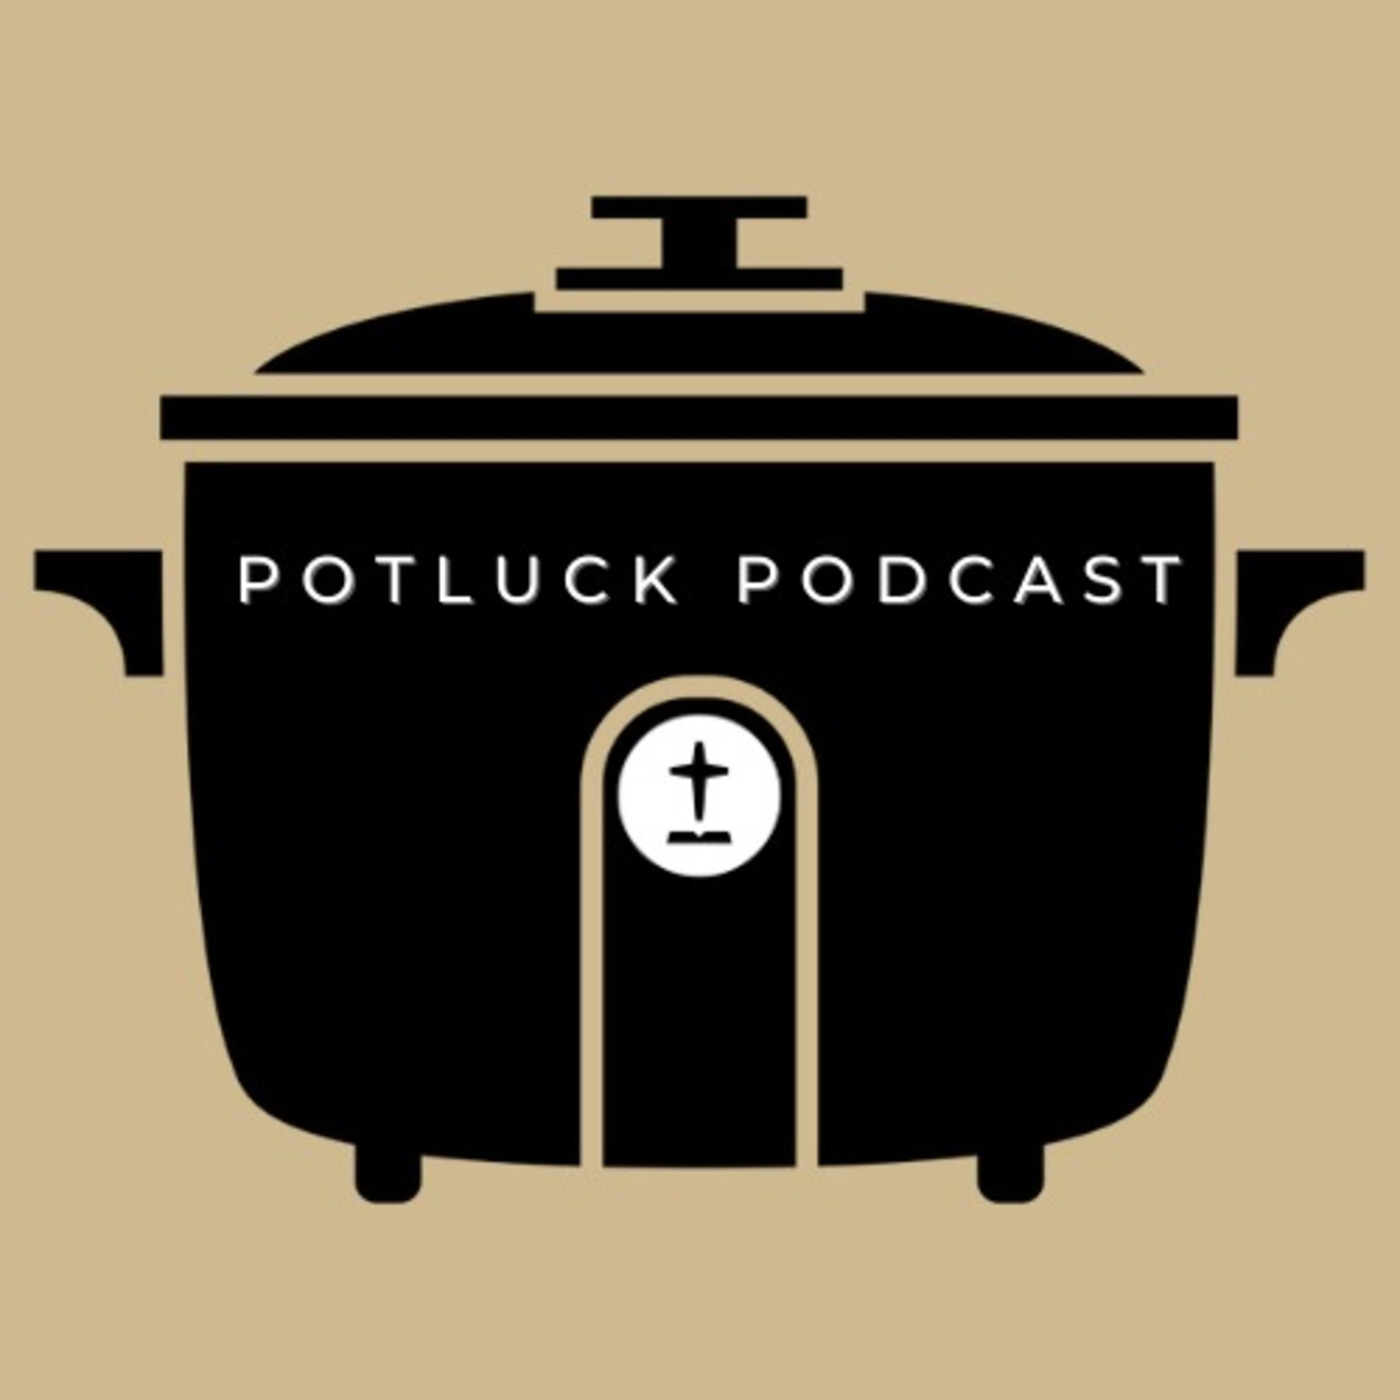 Episode 248: POTLUCK PODCAST 183: IMB Week of Prayer, Send Success, and Have We Had It